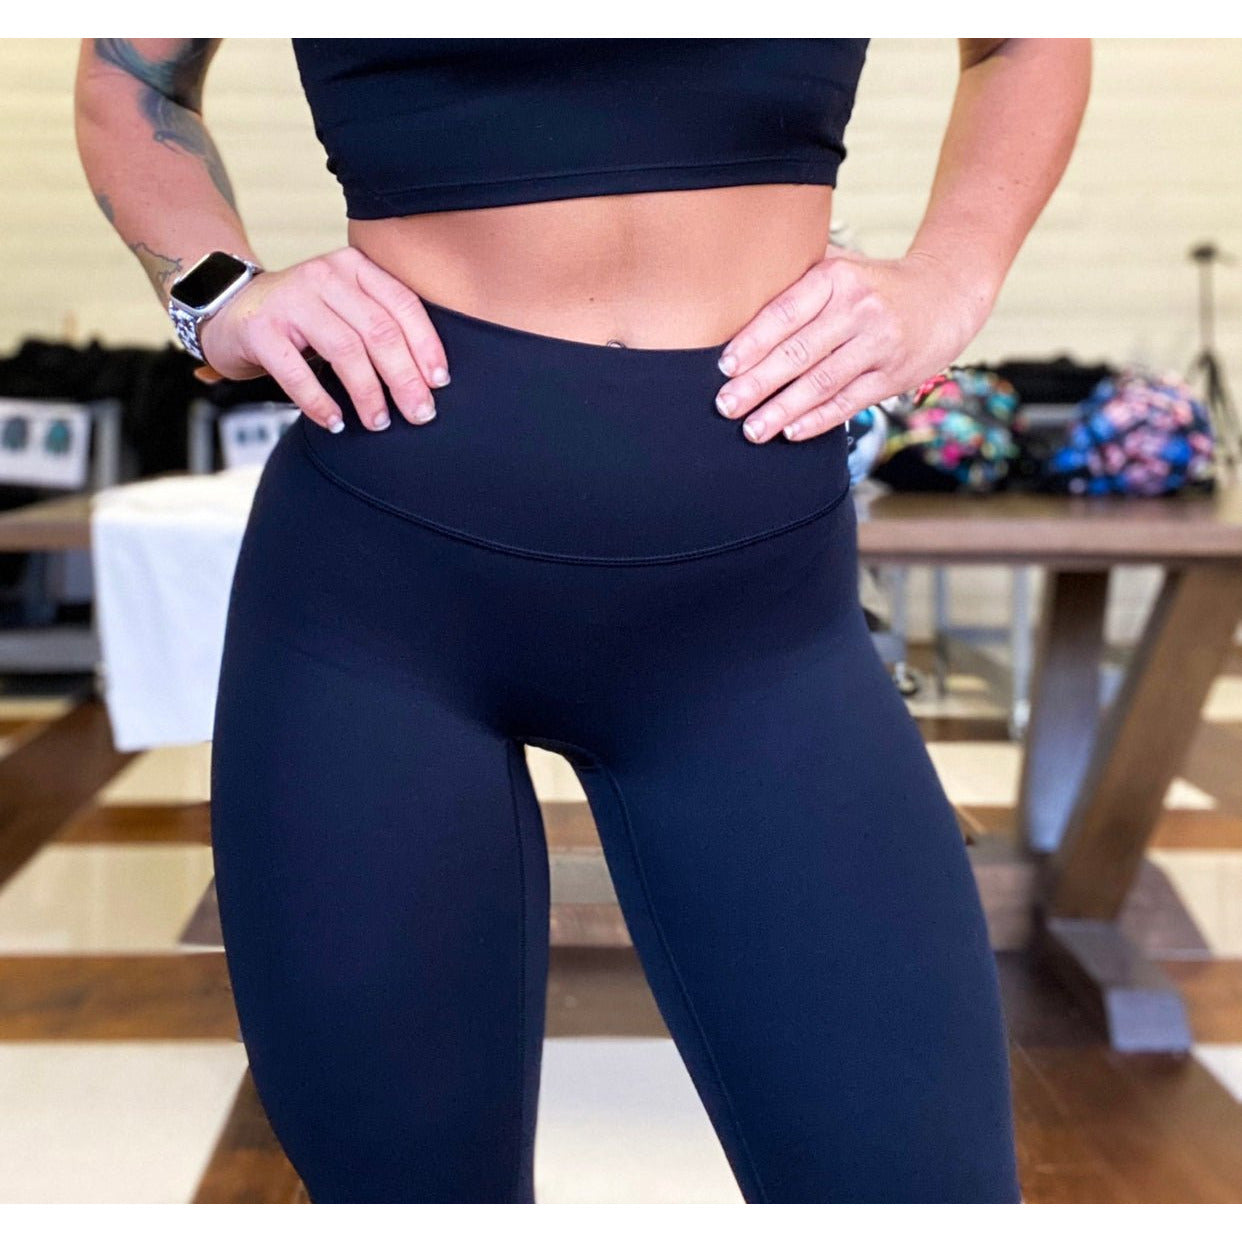 Looking good from all angles in the new Mia Legging. #eladay